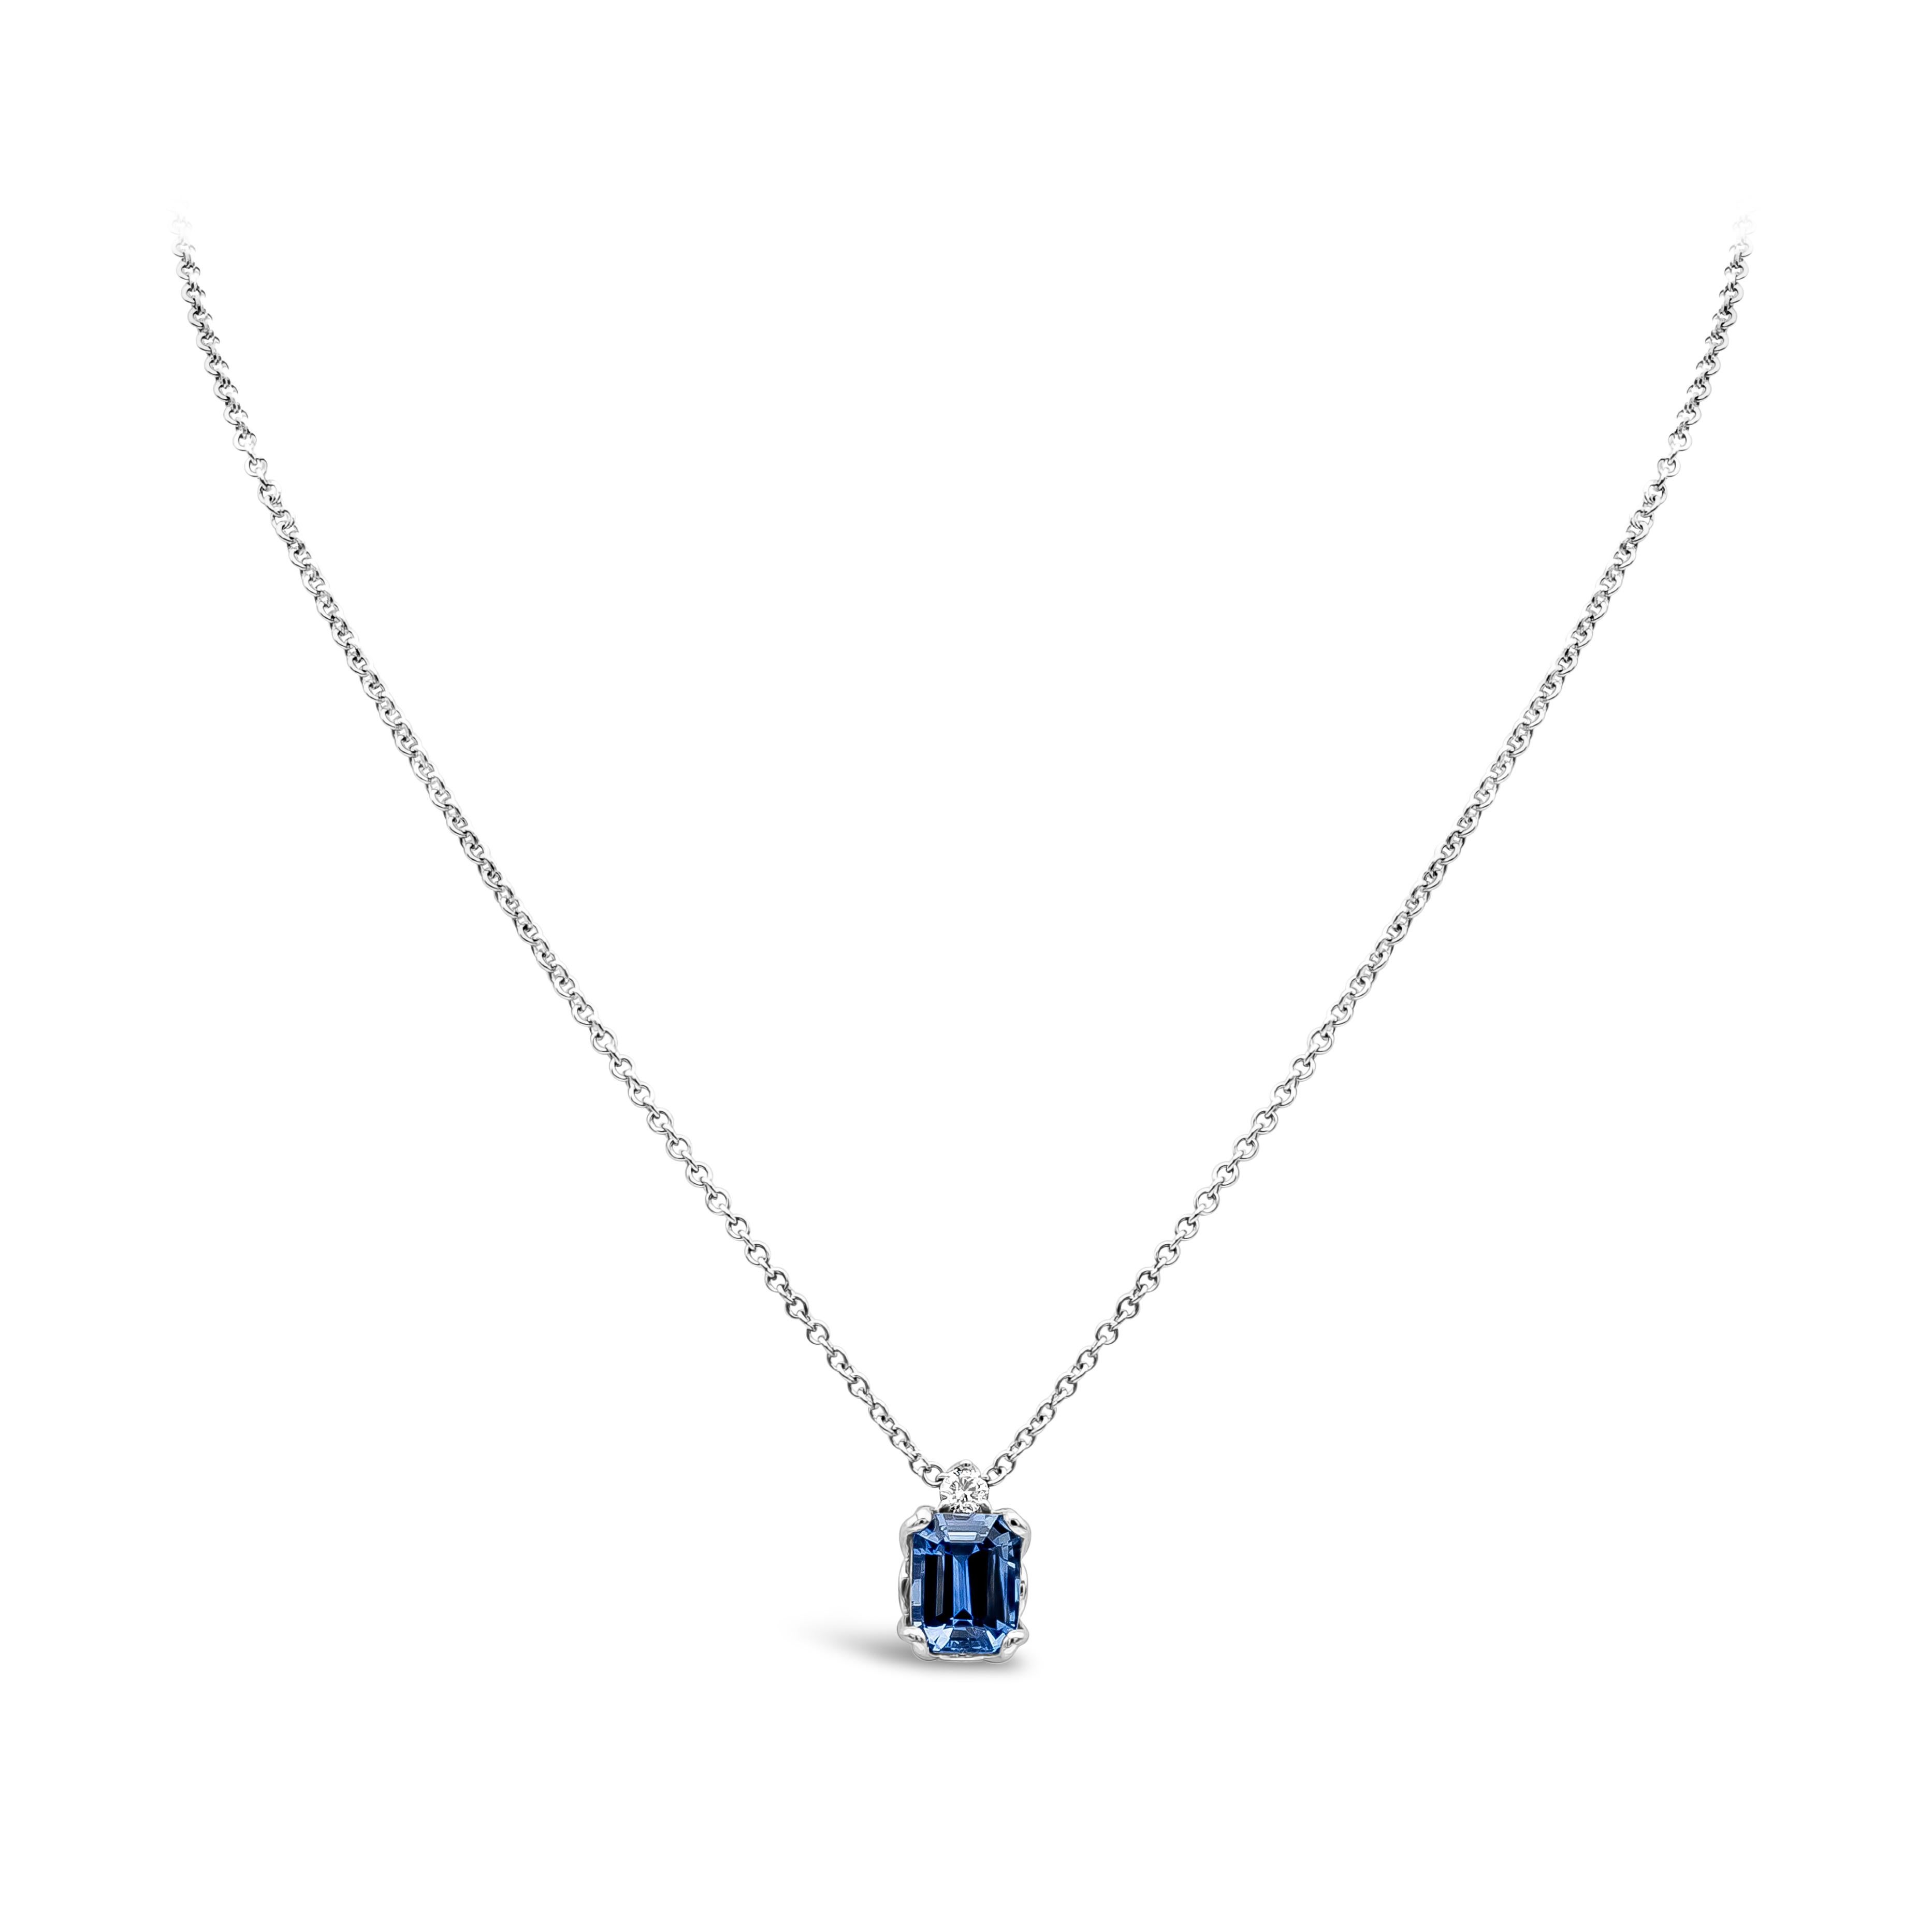 This stunning pendant necklace showcasing a GIA Certified 2.77 carat emerald cut blue sapphire center stone, with 1 round brilliant diamonds that weighs 0.09 carats in total, F color, VS clarity, and set in 18k White Gold. 18 inches in Length.